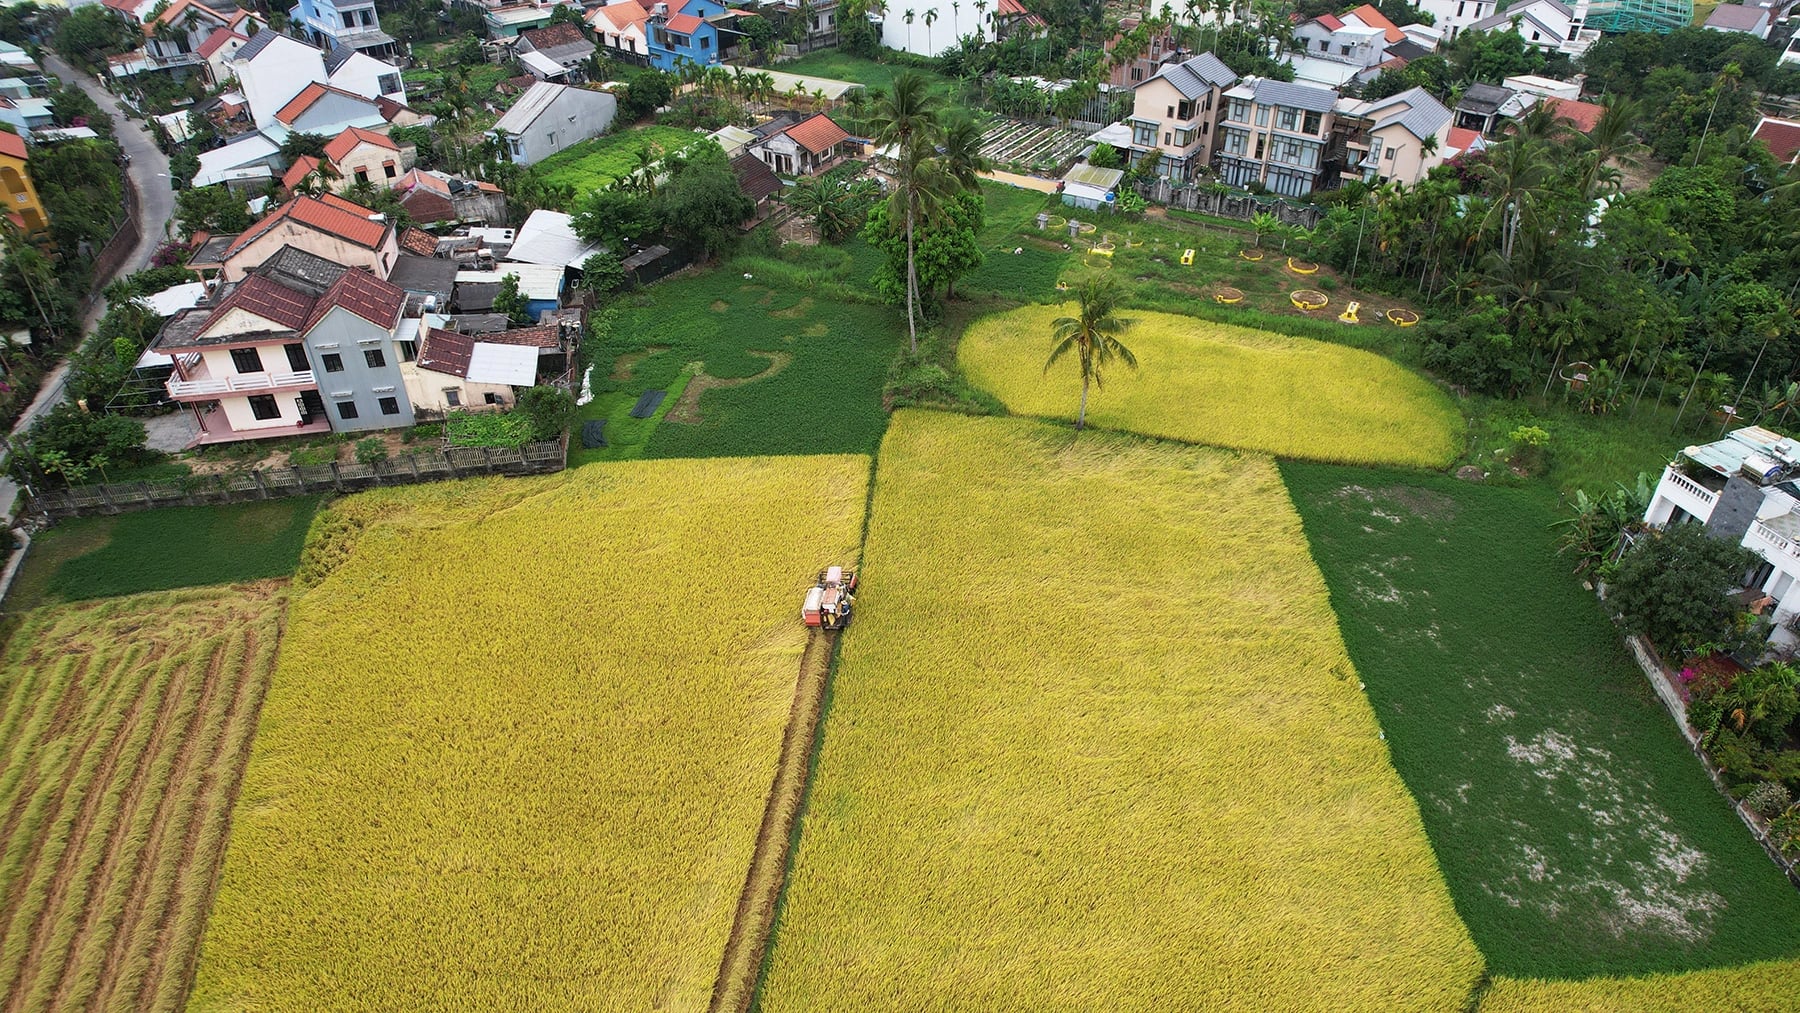 Ripe rice season a magnet for tourists in Vietnam's Hoi An City